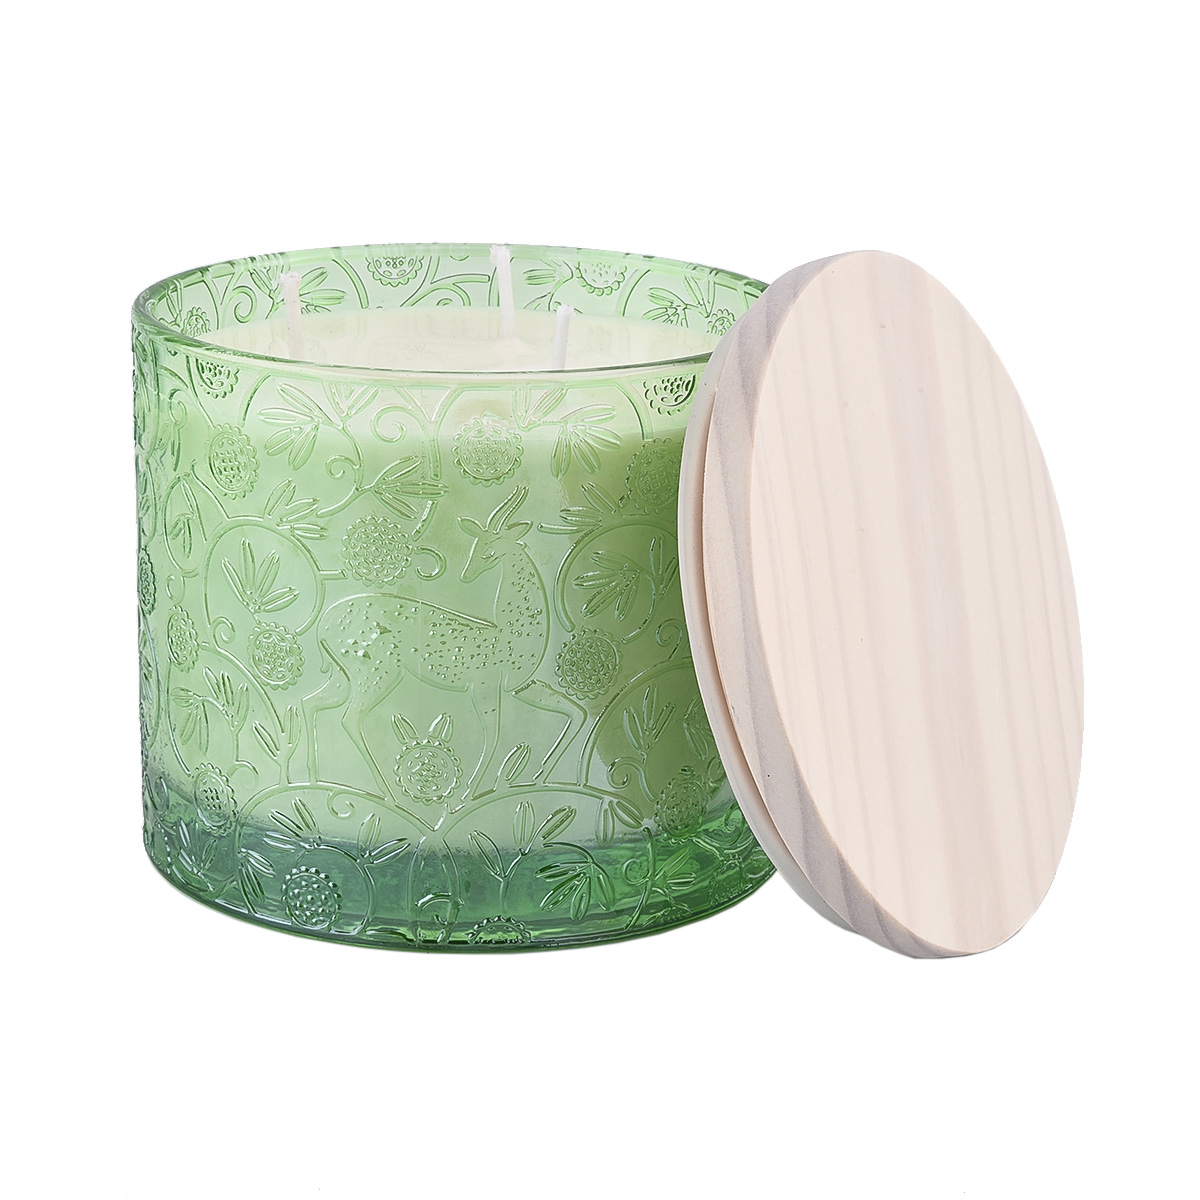 Wholesale Home Decoration Green Deer Pattern Glass Candle Jar